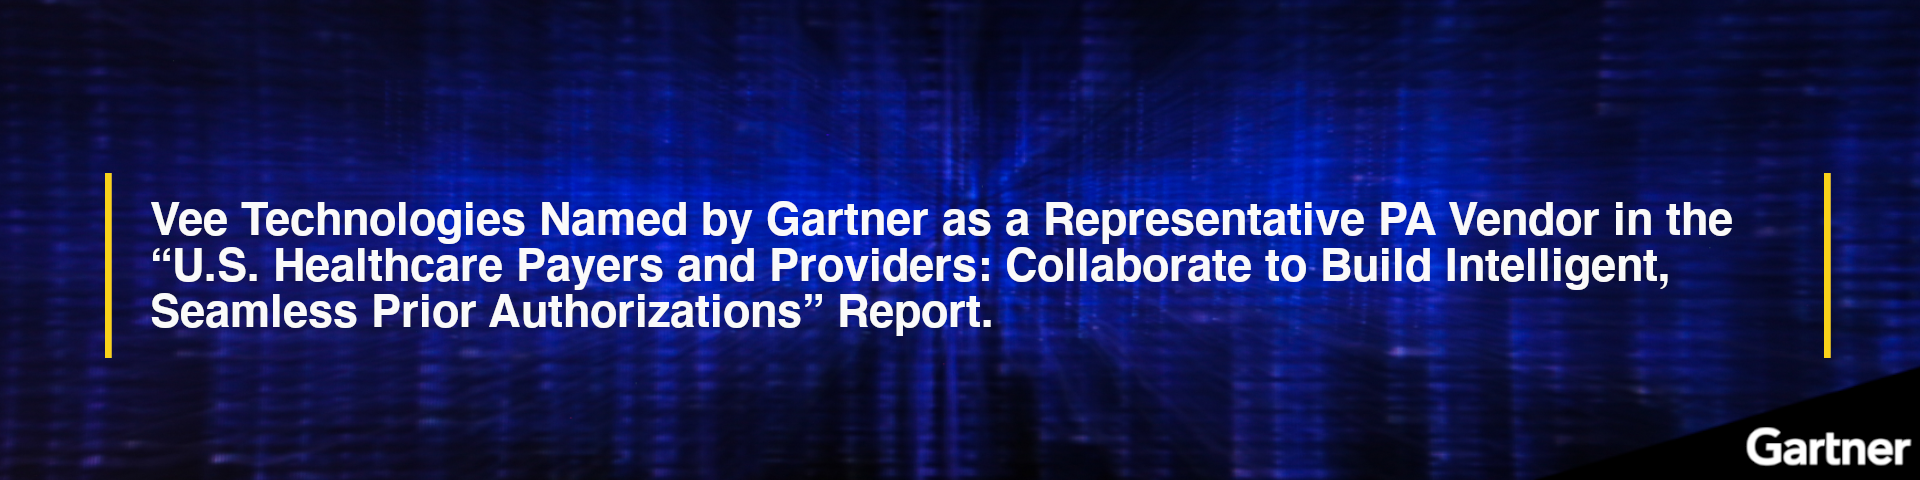 Vee Healthtek Named by Gartner as a Representative Prior Authorization Vendor in the “U.S. Healthcare Payers and Providers: Collaborate to Build Intelligent, Seamless Prior Authorizations” Report